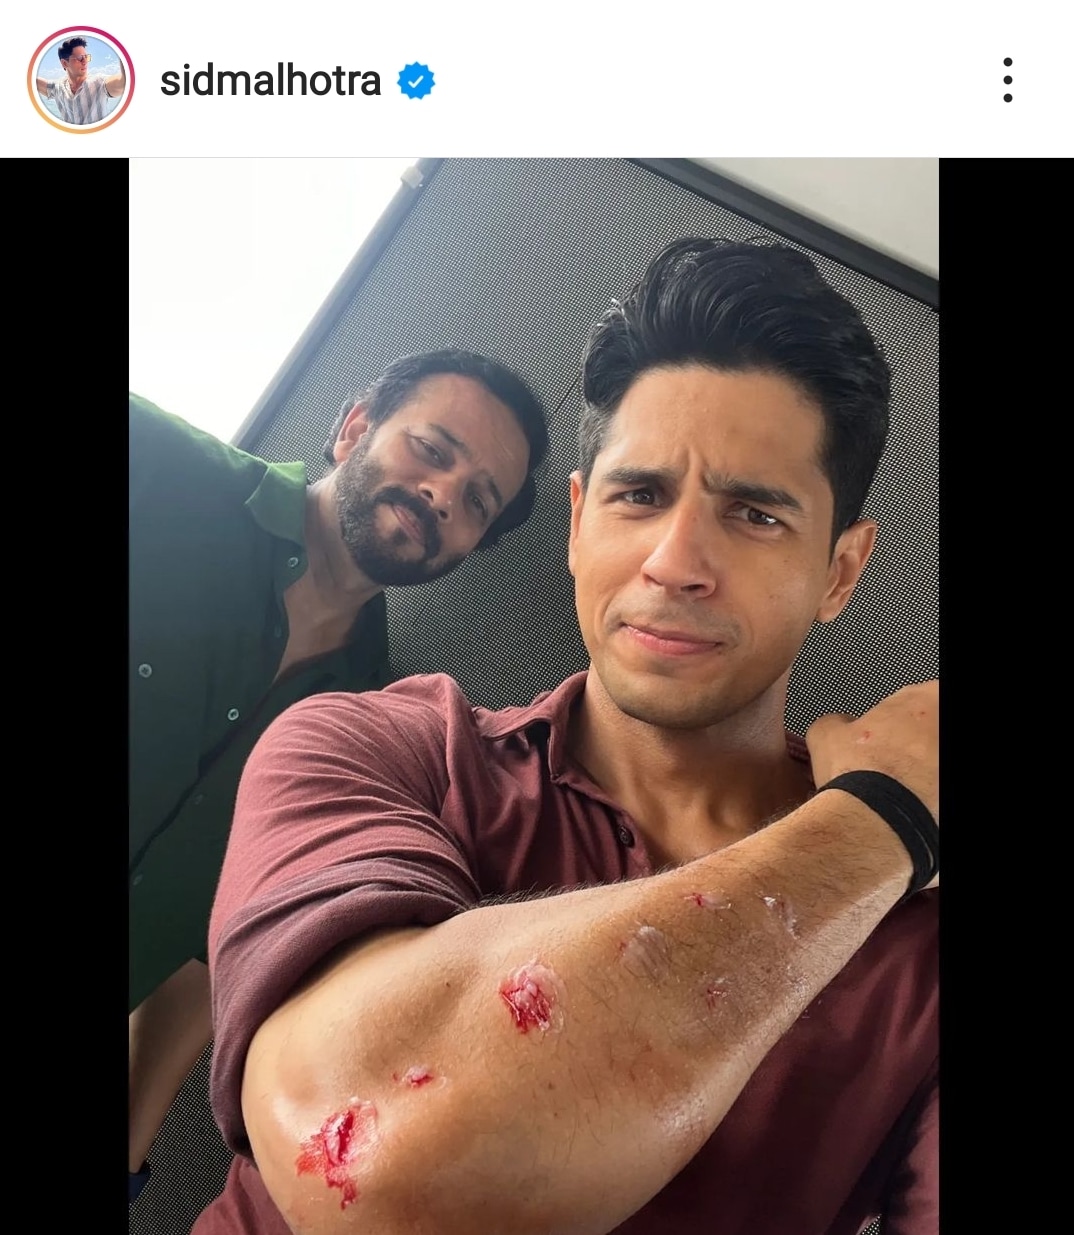 Actor Sidharth Malhotra showed off his arm injury in a new Instagram photo.